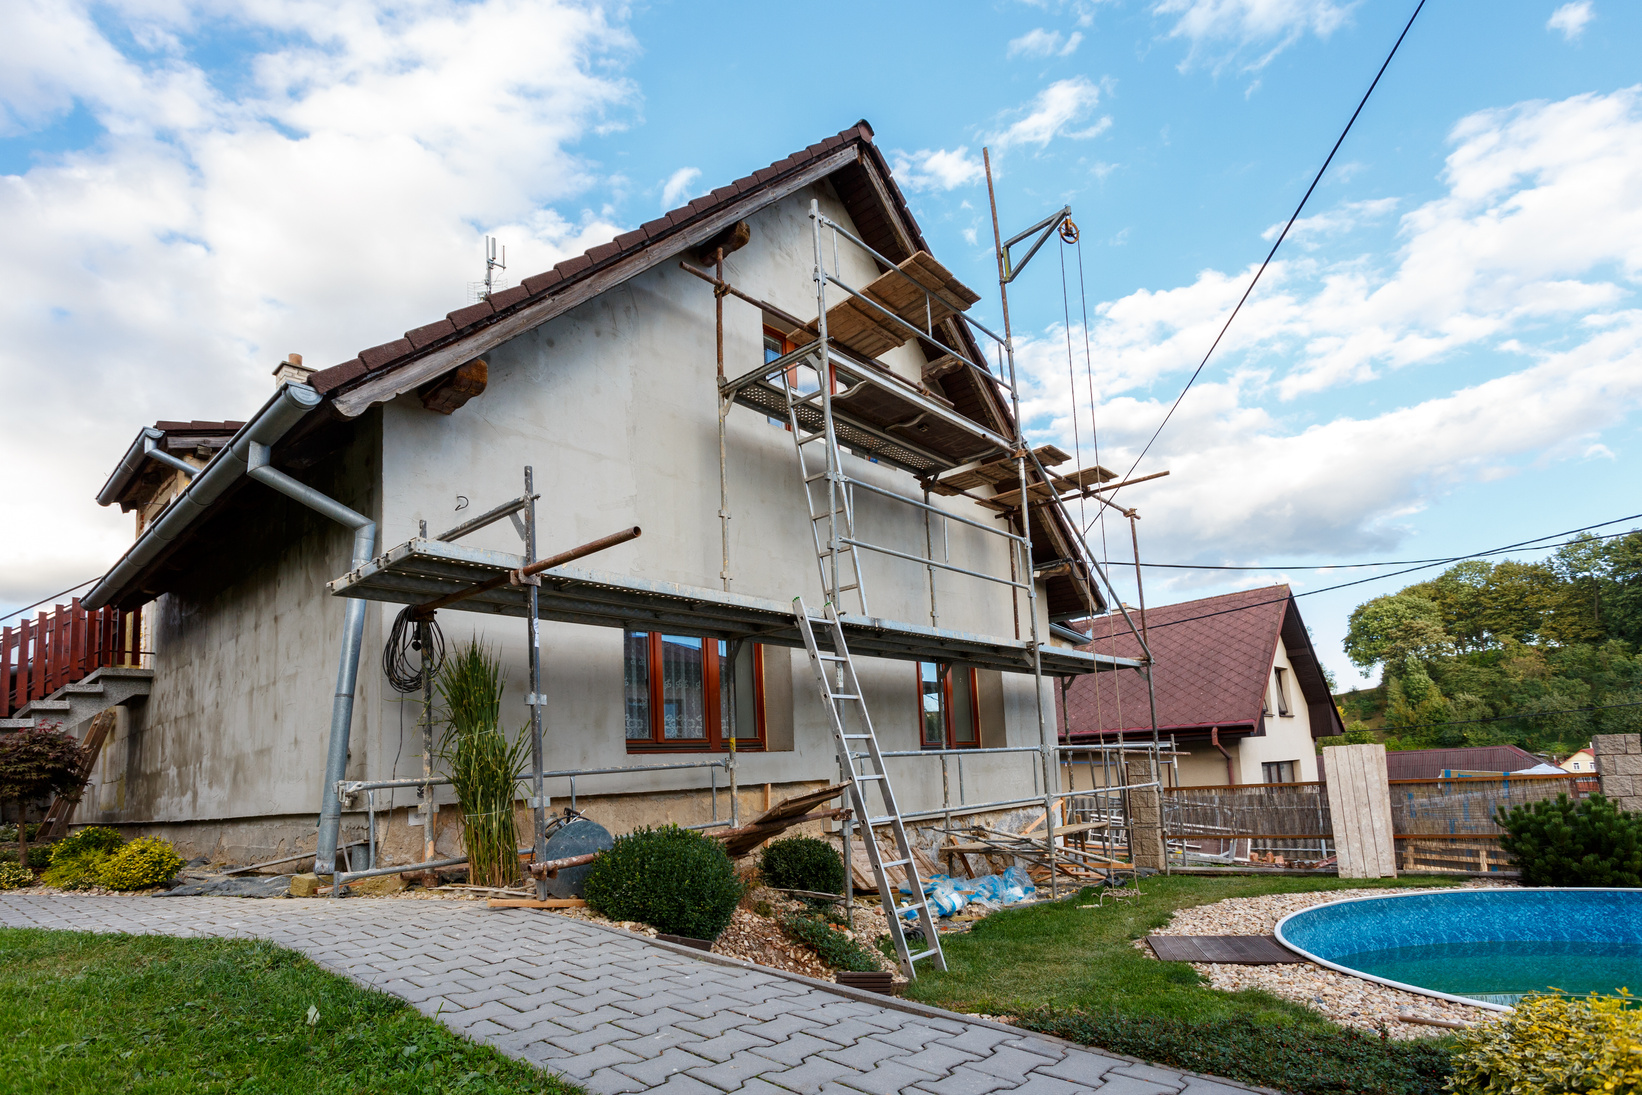 Construction or Repair of a House